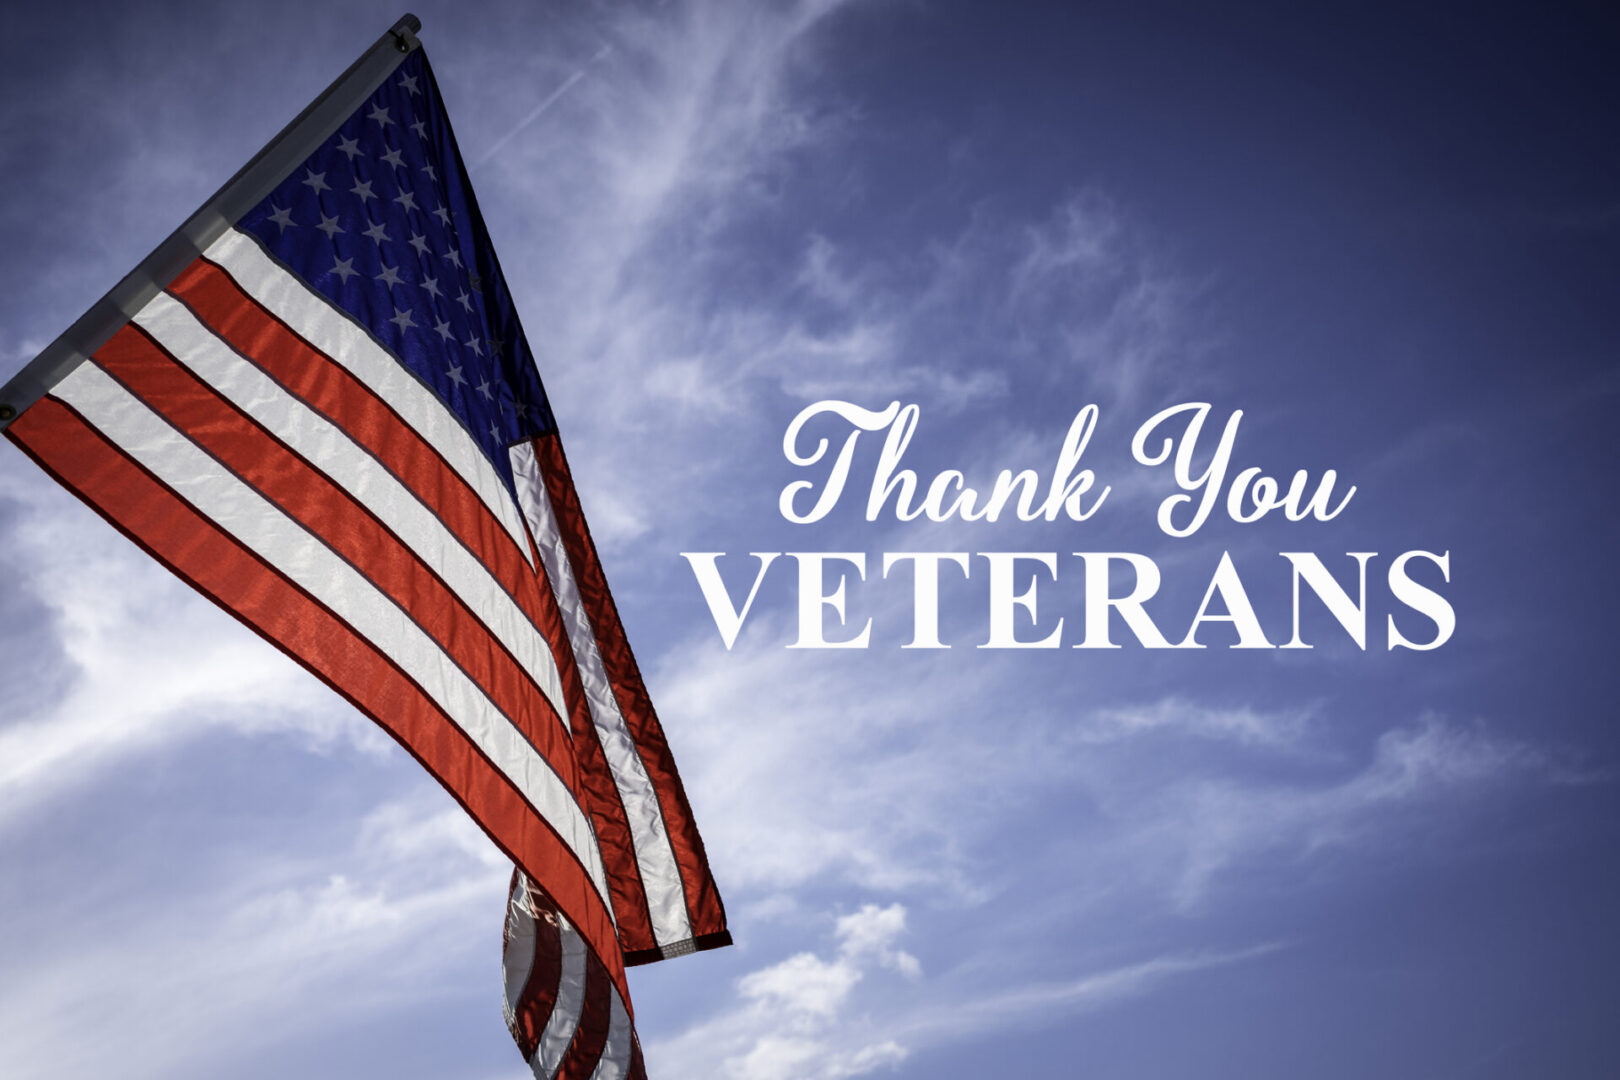 Veteran's Day Honors All Those Who Have and Continue to Serve the